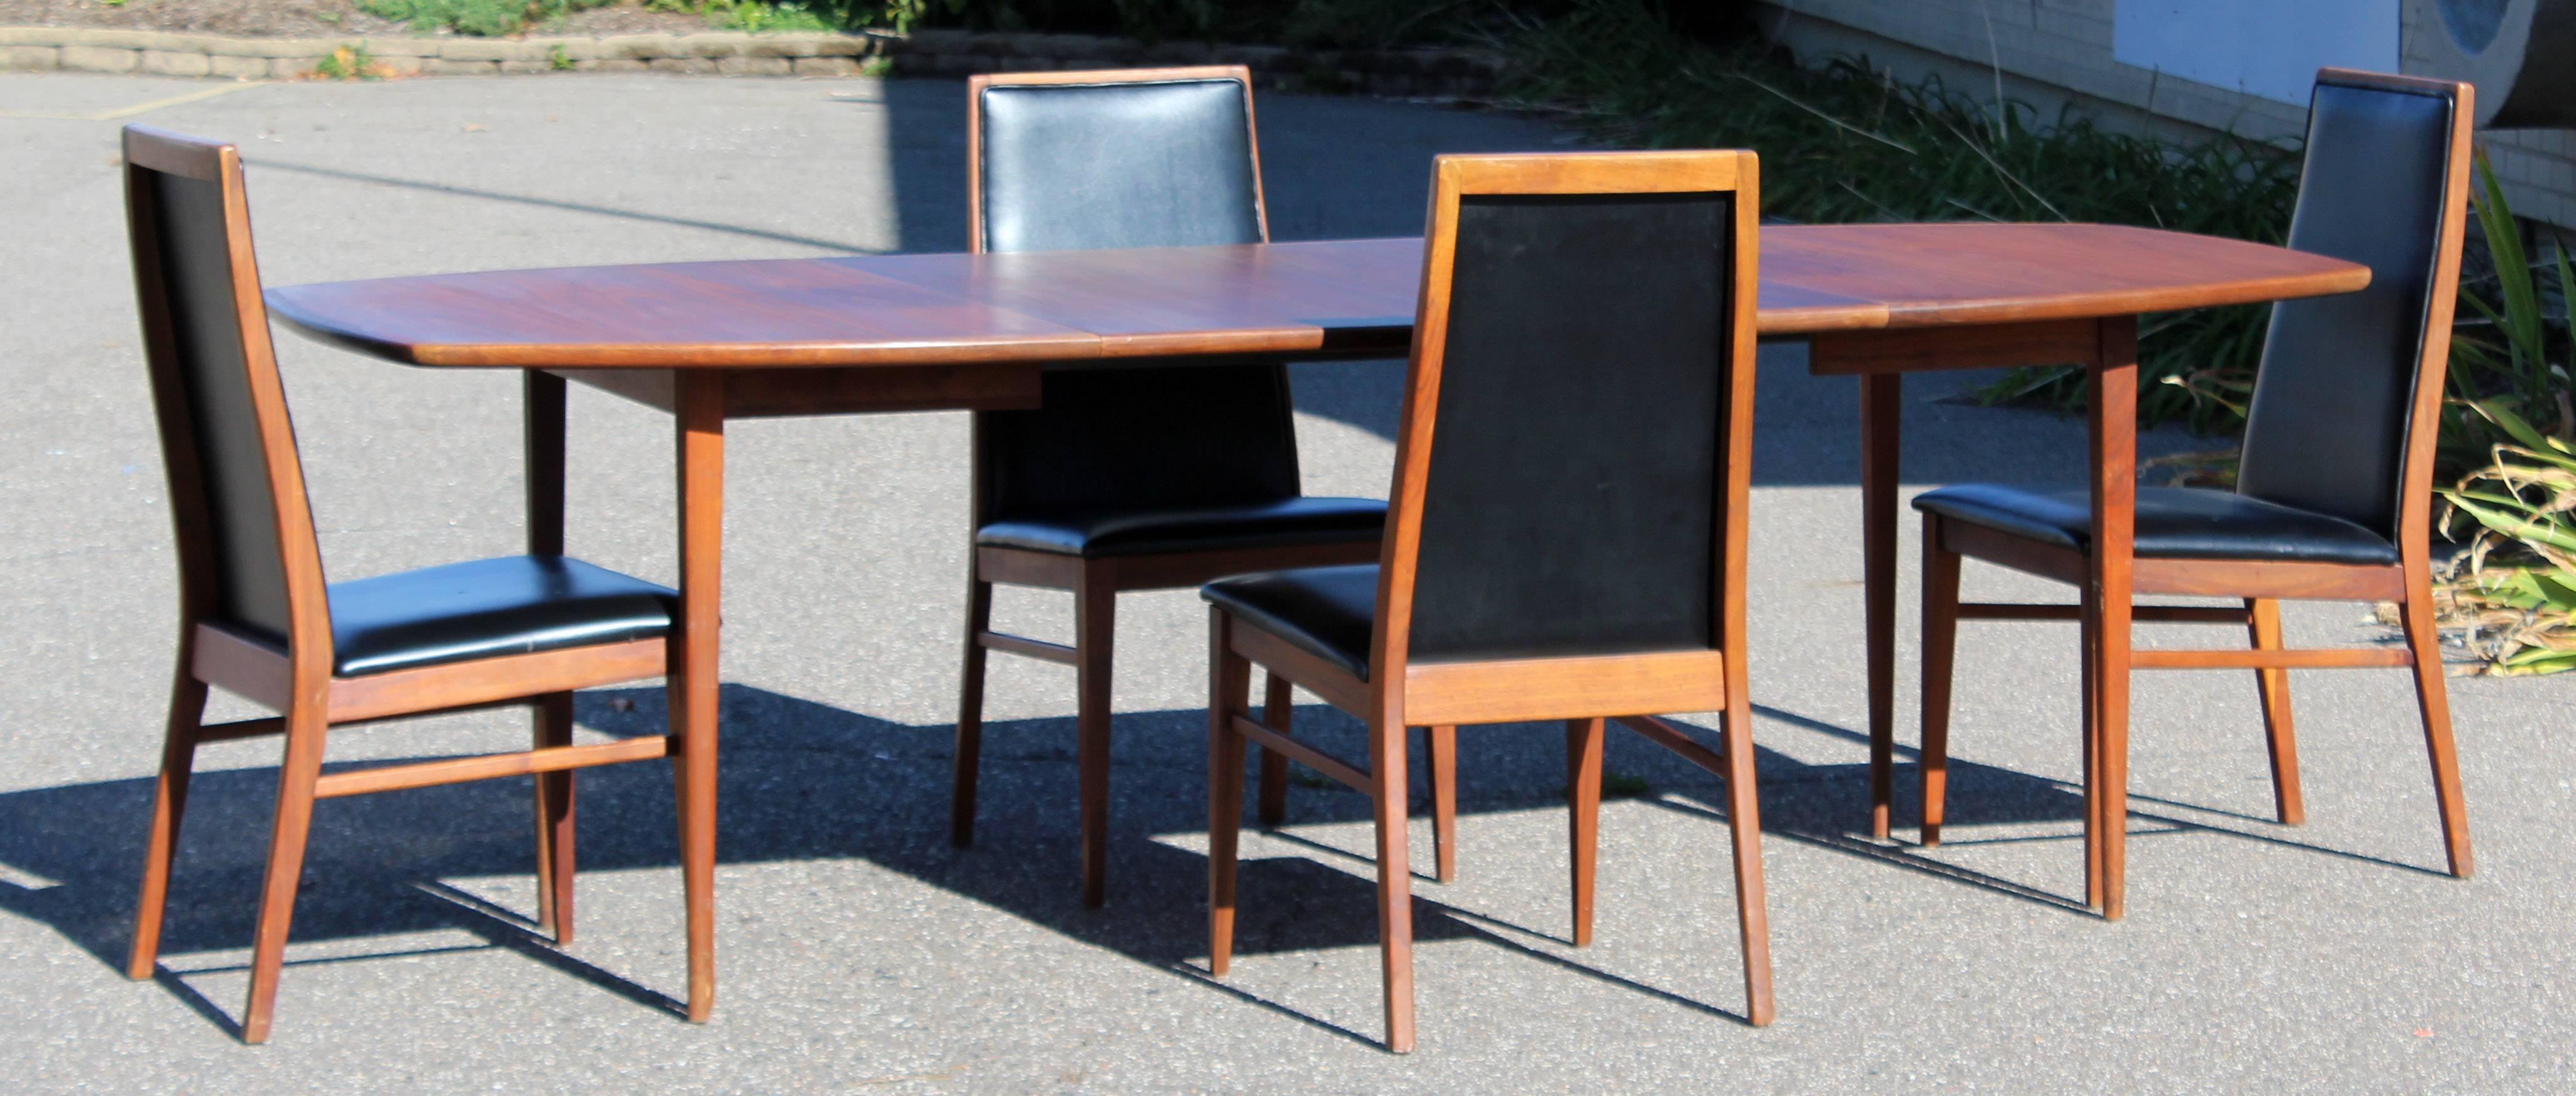 dillingham dining table